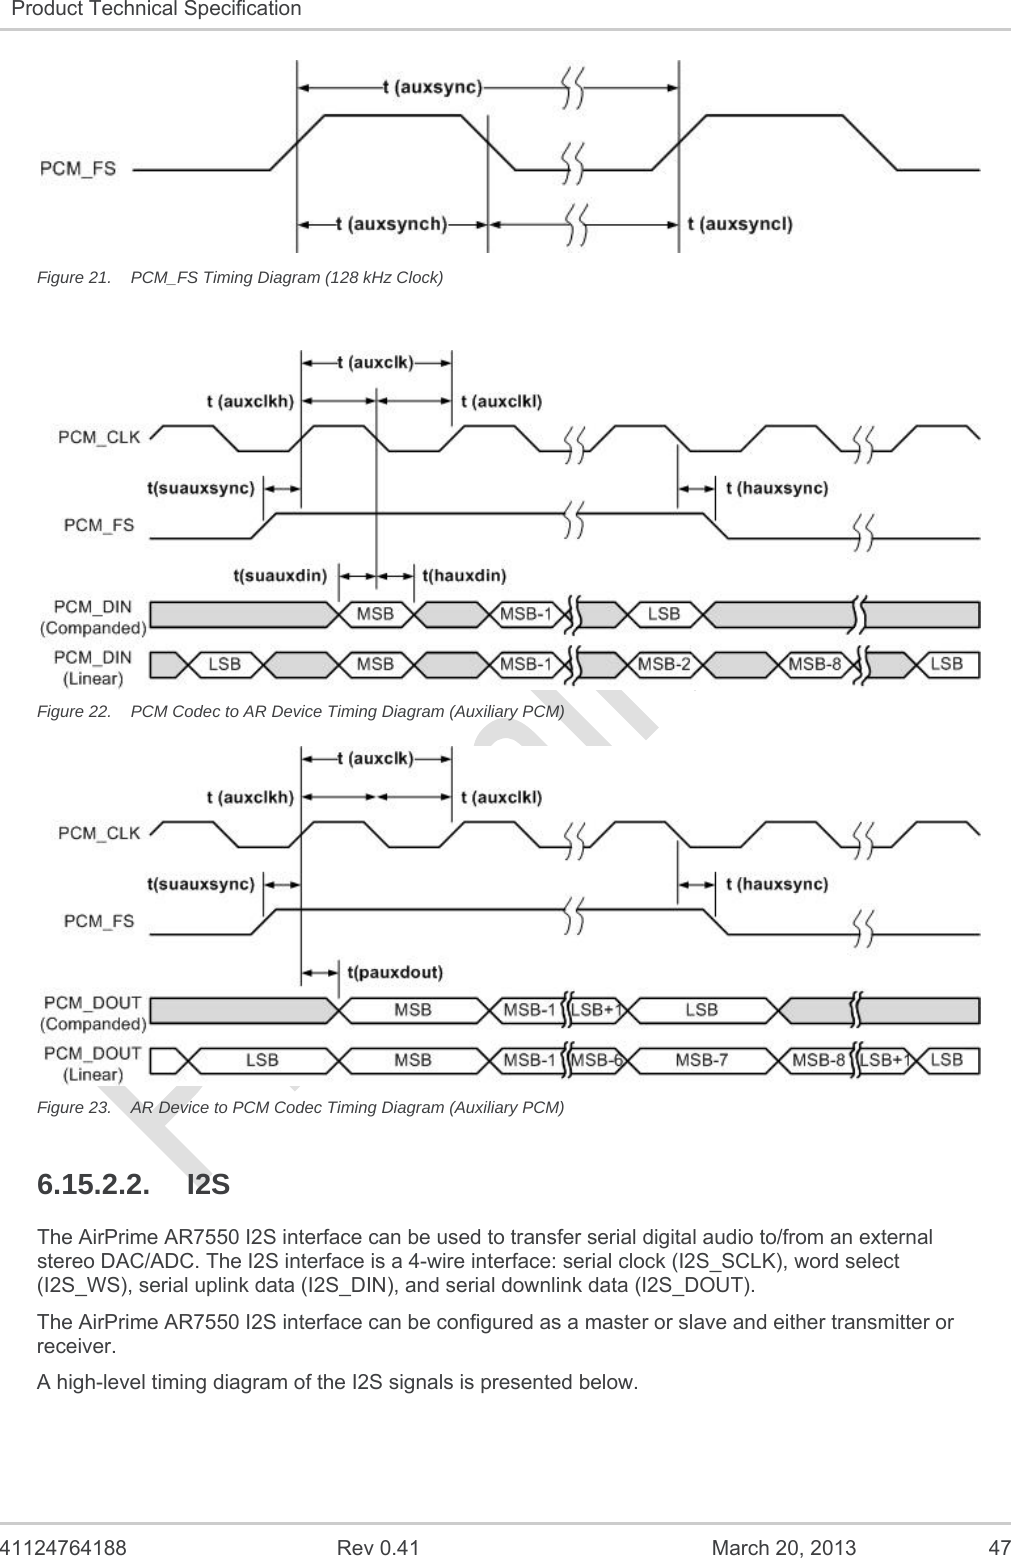   41124764188  Rev 0.41  March 20, 2013  47 Product Technical Specification    Figure 21.  PCM_FS Timing Diagram (128 kHz Clock)   Figure 22.  PCM Codec to AR Device Timing Diagram (Auxiliary PCM)  Figure 23.  AR Device to PCM Codec Timing Diagram (Auxiliary PCM) 6.15.2.2. I2S The AirPrime AR7550 I2S interface can be used to transfer serial digital audio to/from an external stereo DAC/ADC. The I2S interface is a 4-wire interface: serial clock (I2S_SCLK), word select (I2S_WS), serial uplink data (I2S_DIN), and serial downlink data (I2S_DOUT). The AirPrime AR7550 I2S interface can be configured as a master or slave and either transmitter or receiver. A high-level timing diagram of the I2S signals is presented below. 